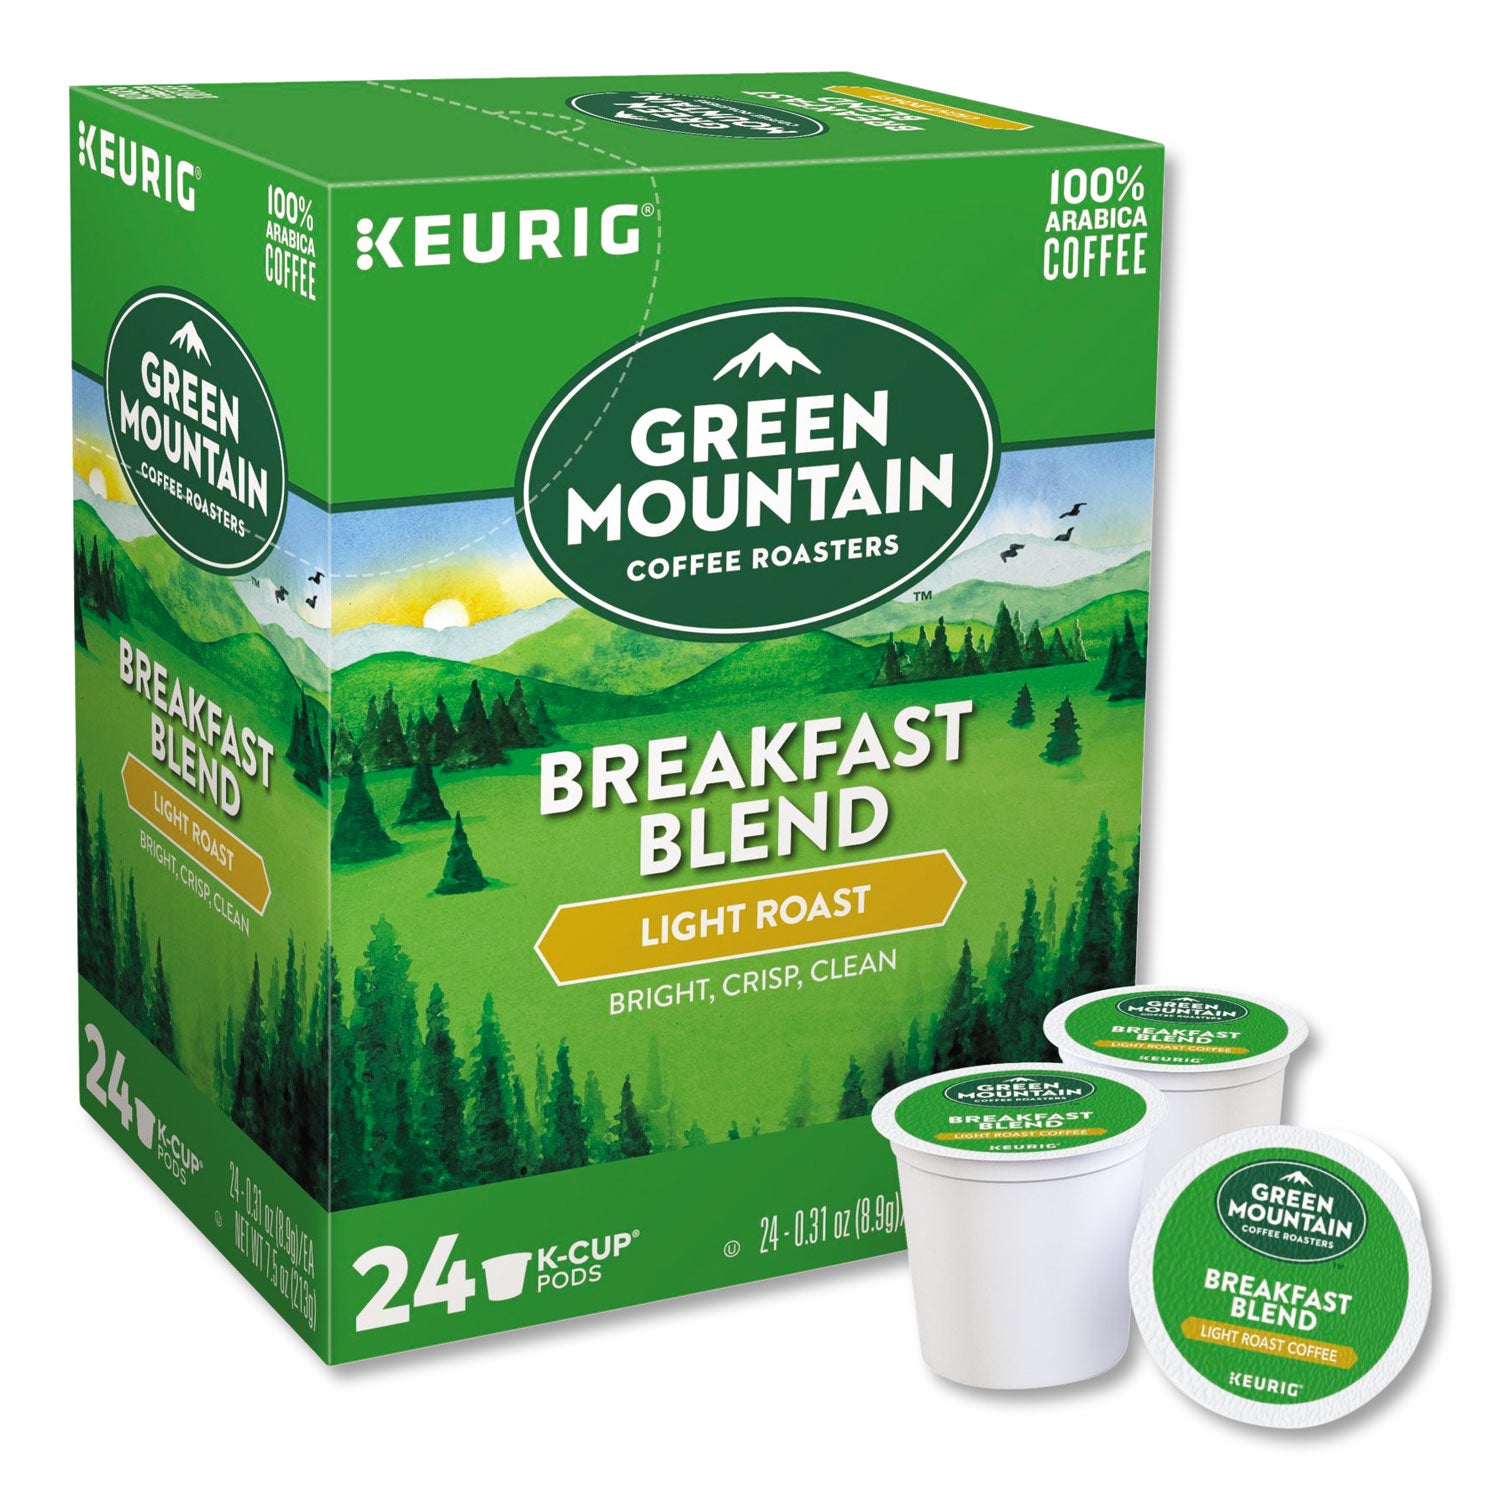 breakfast-blend-coffee-k-cup-pods-24-box_gmt6520 - 1